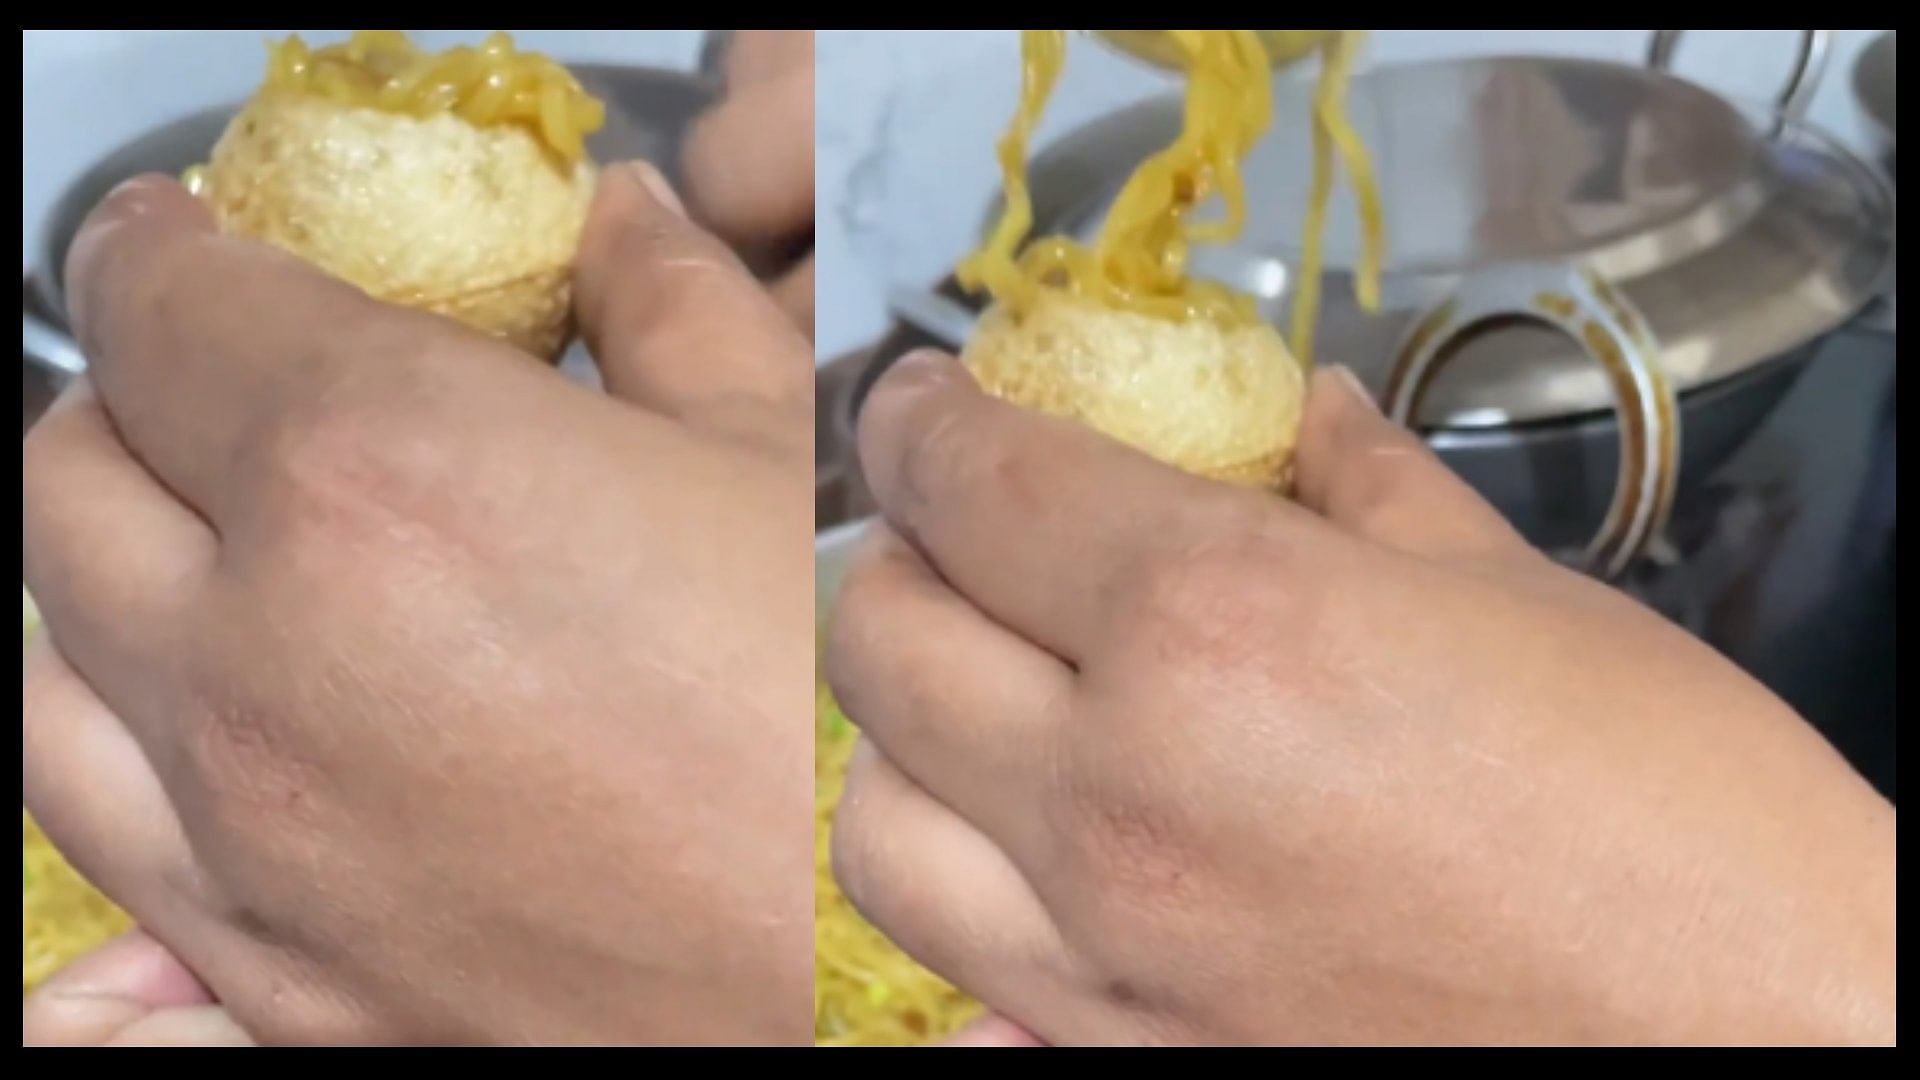 Woman eats panipuri with maggie weird food combination video goes vira on social media